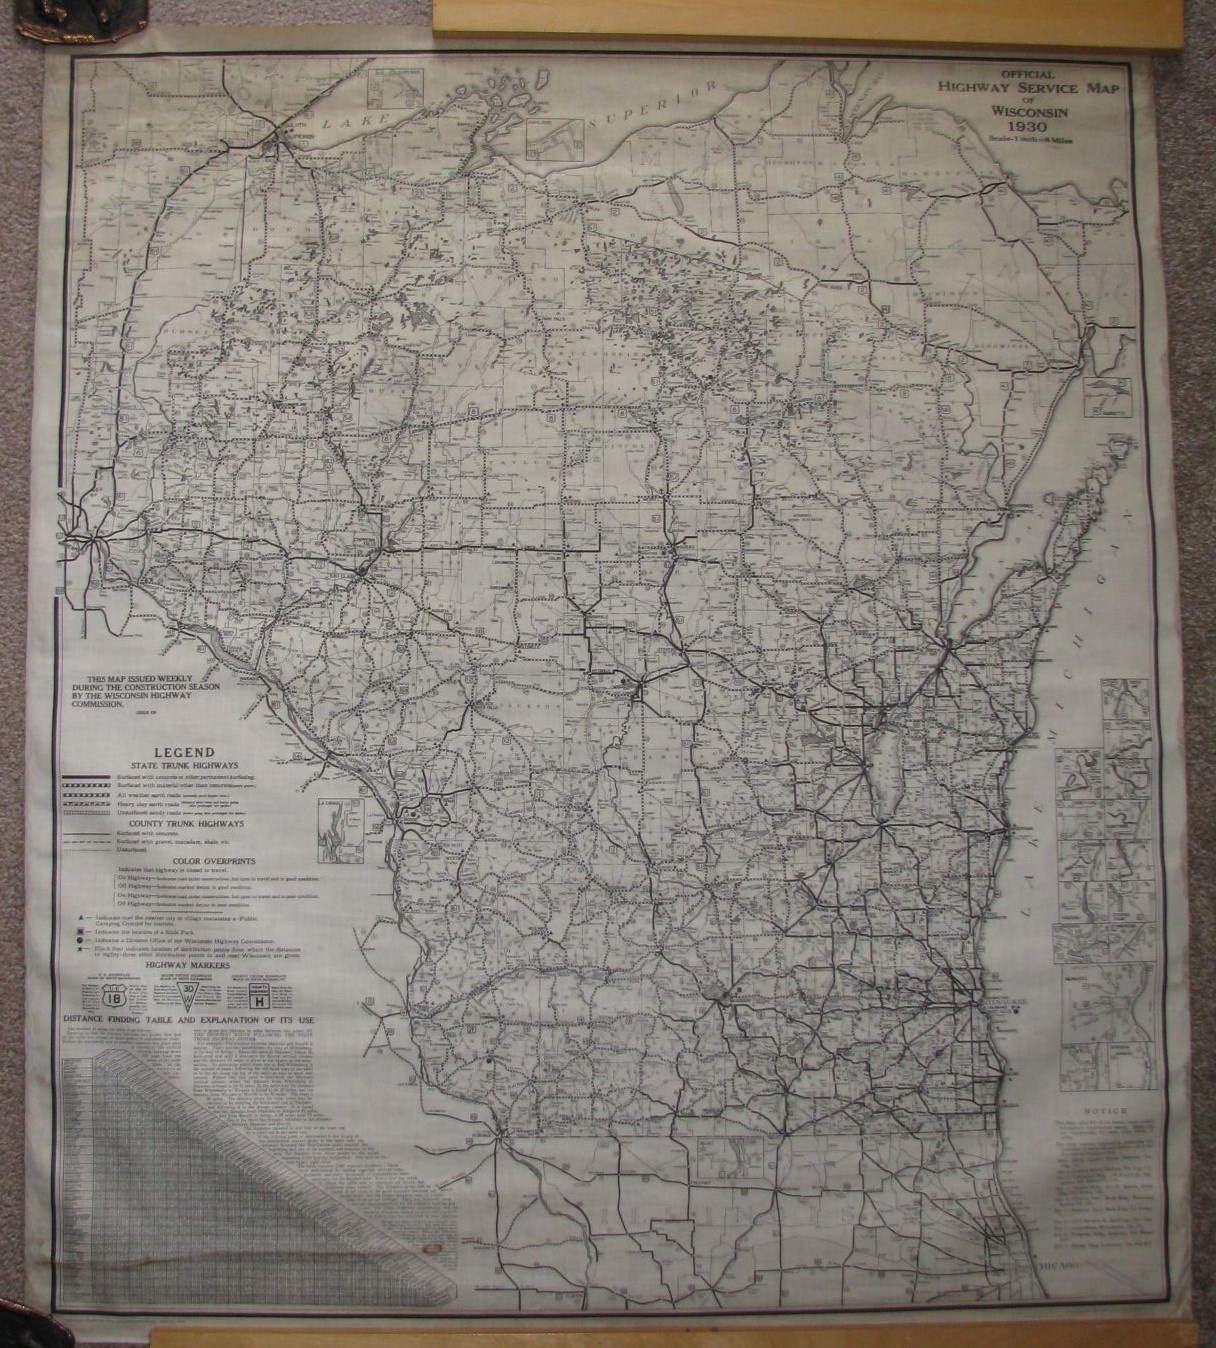 Image for Official Highway Service Map of Wisconsin, 1930 [large]